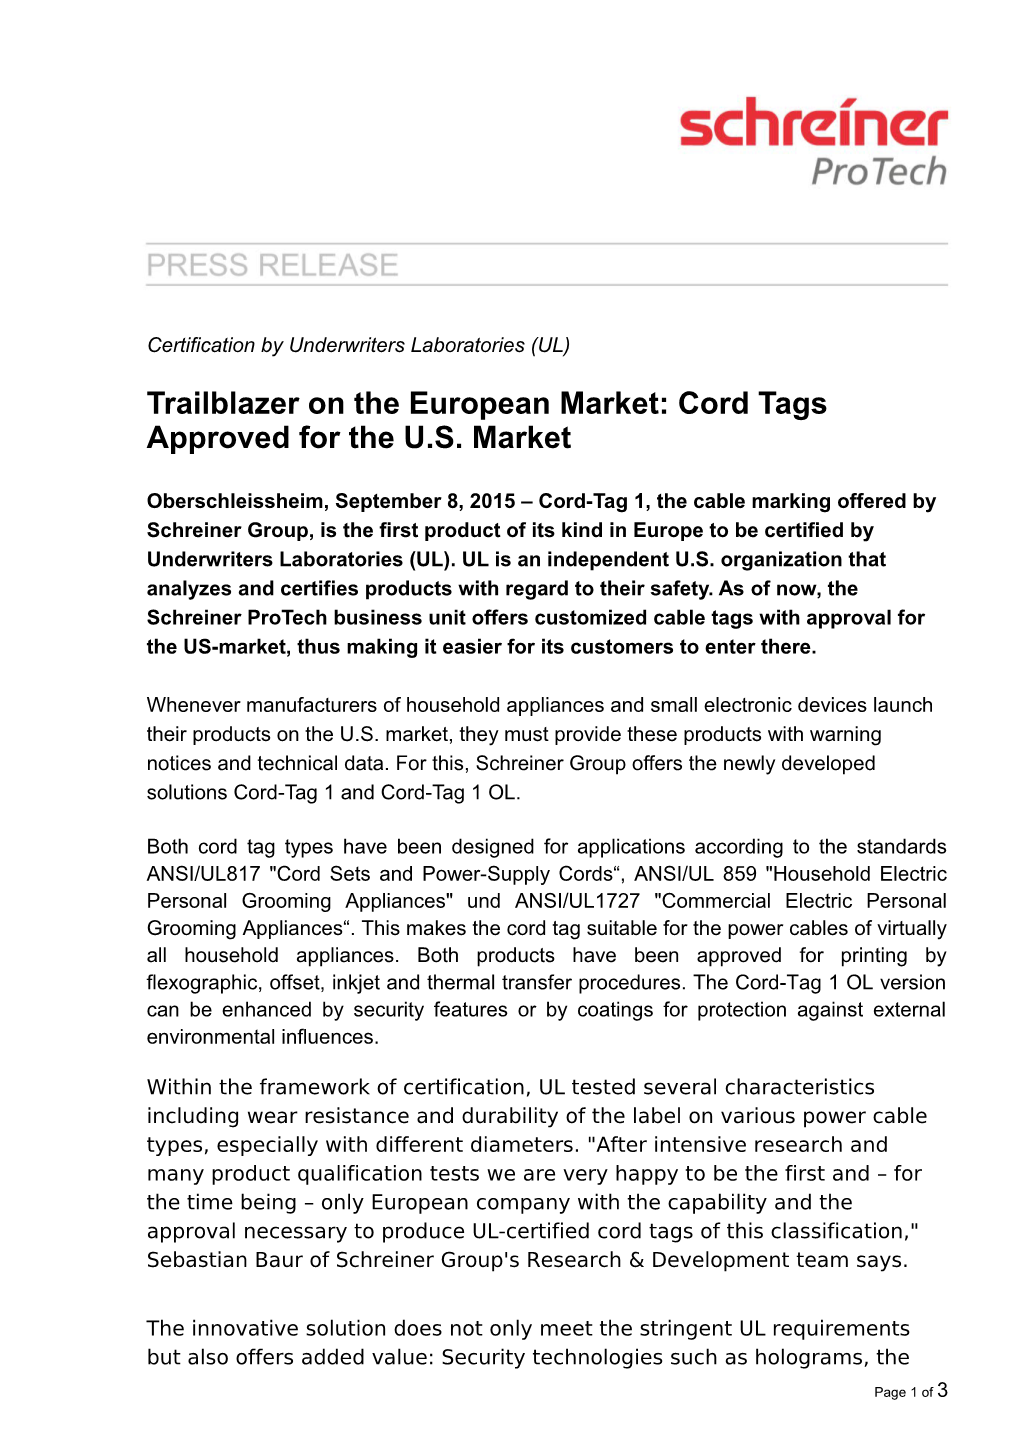 Trailblazer on the European Market: Cord Tags Approved for the U.S. Market